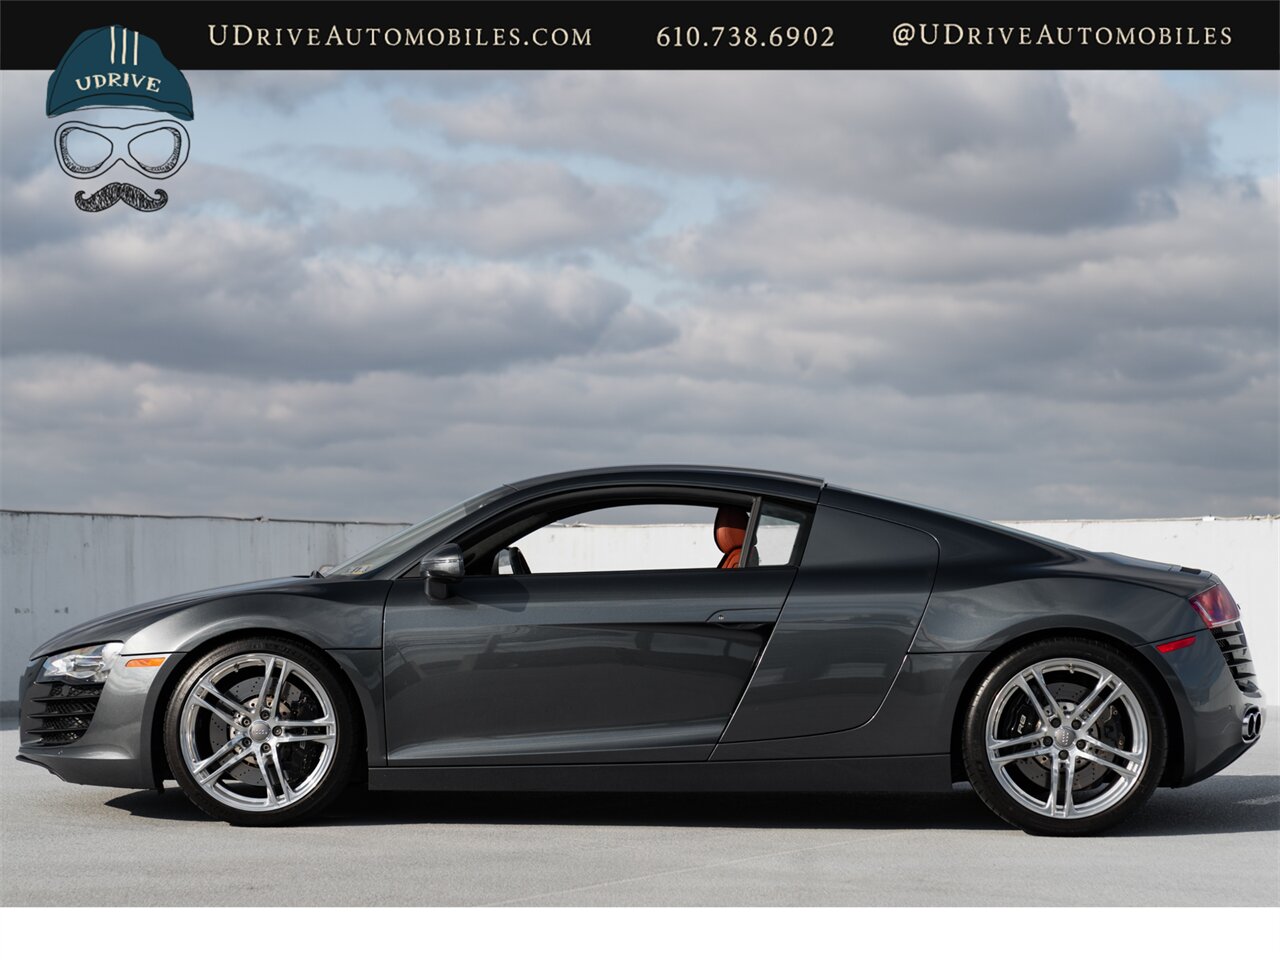 2009 Audi R8 Quattro  4.2 V8 6 Speed Manual 15k Miles - Photo 11 - West Chester, PA 19382